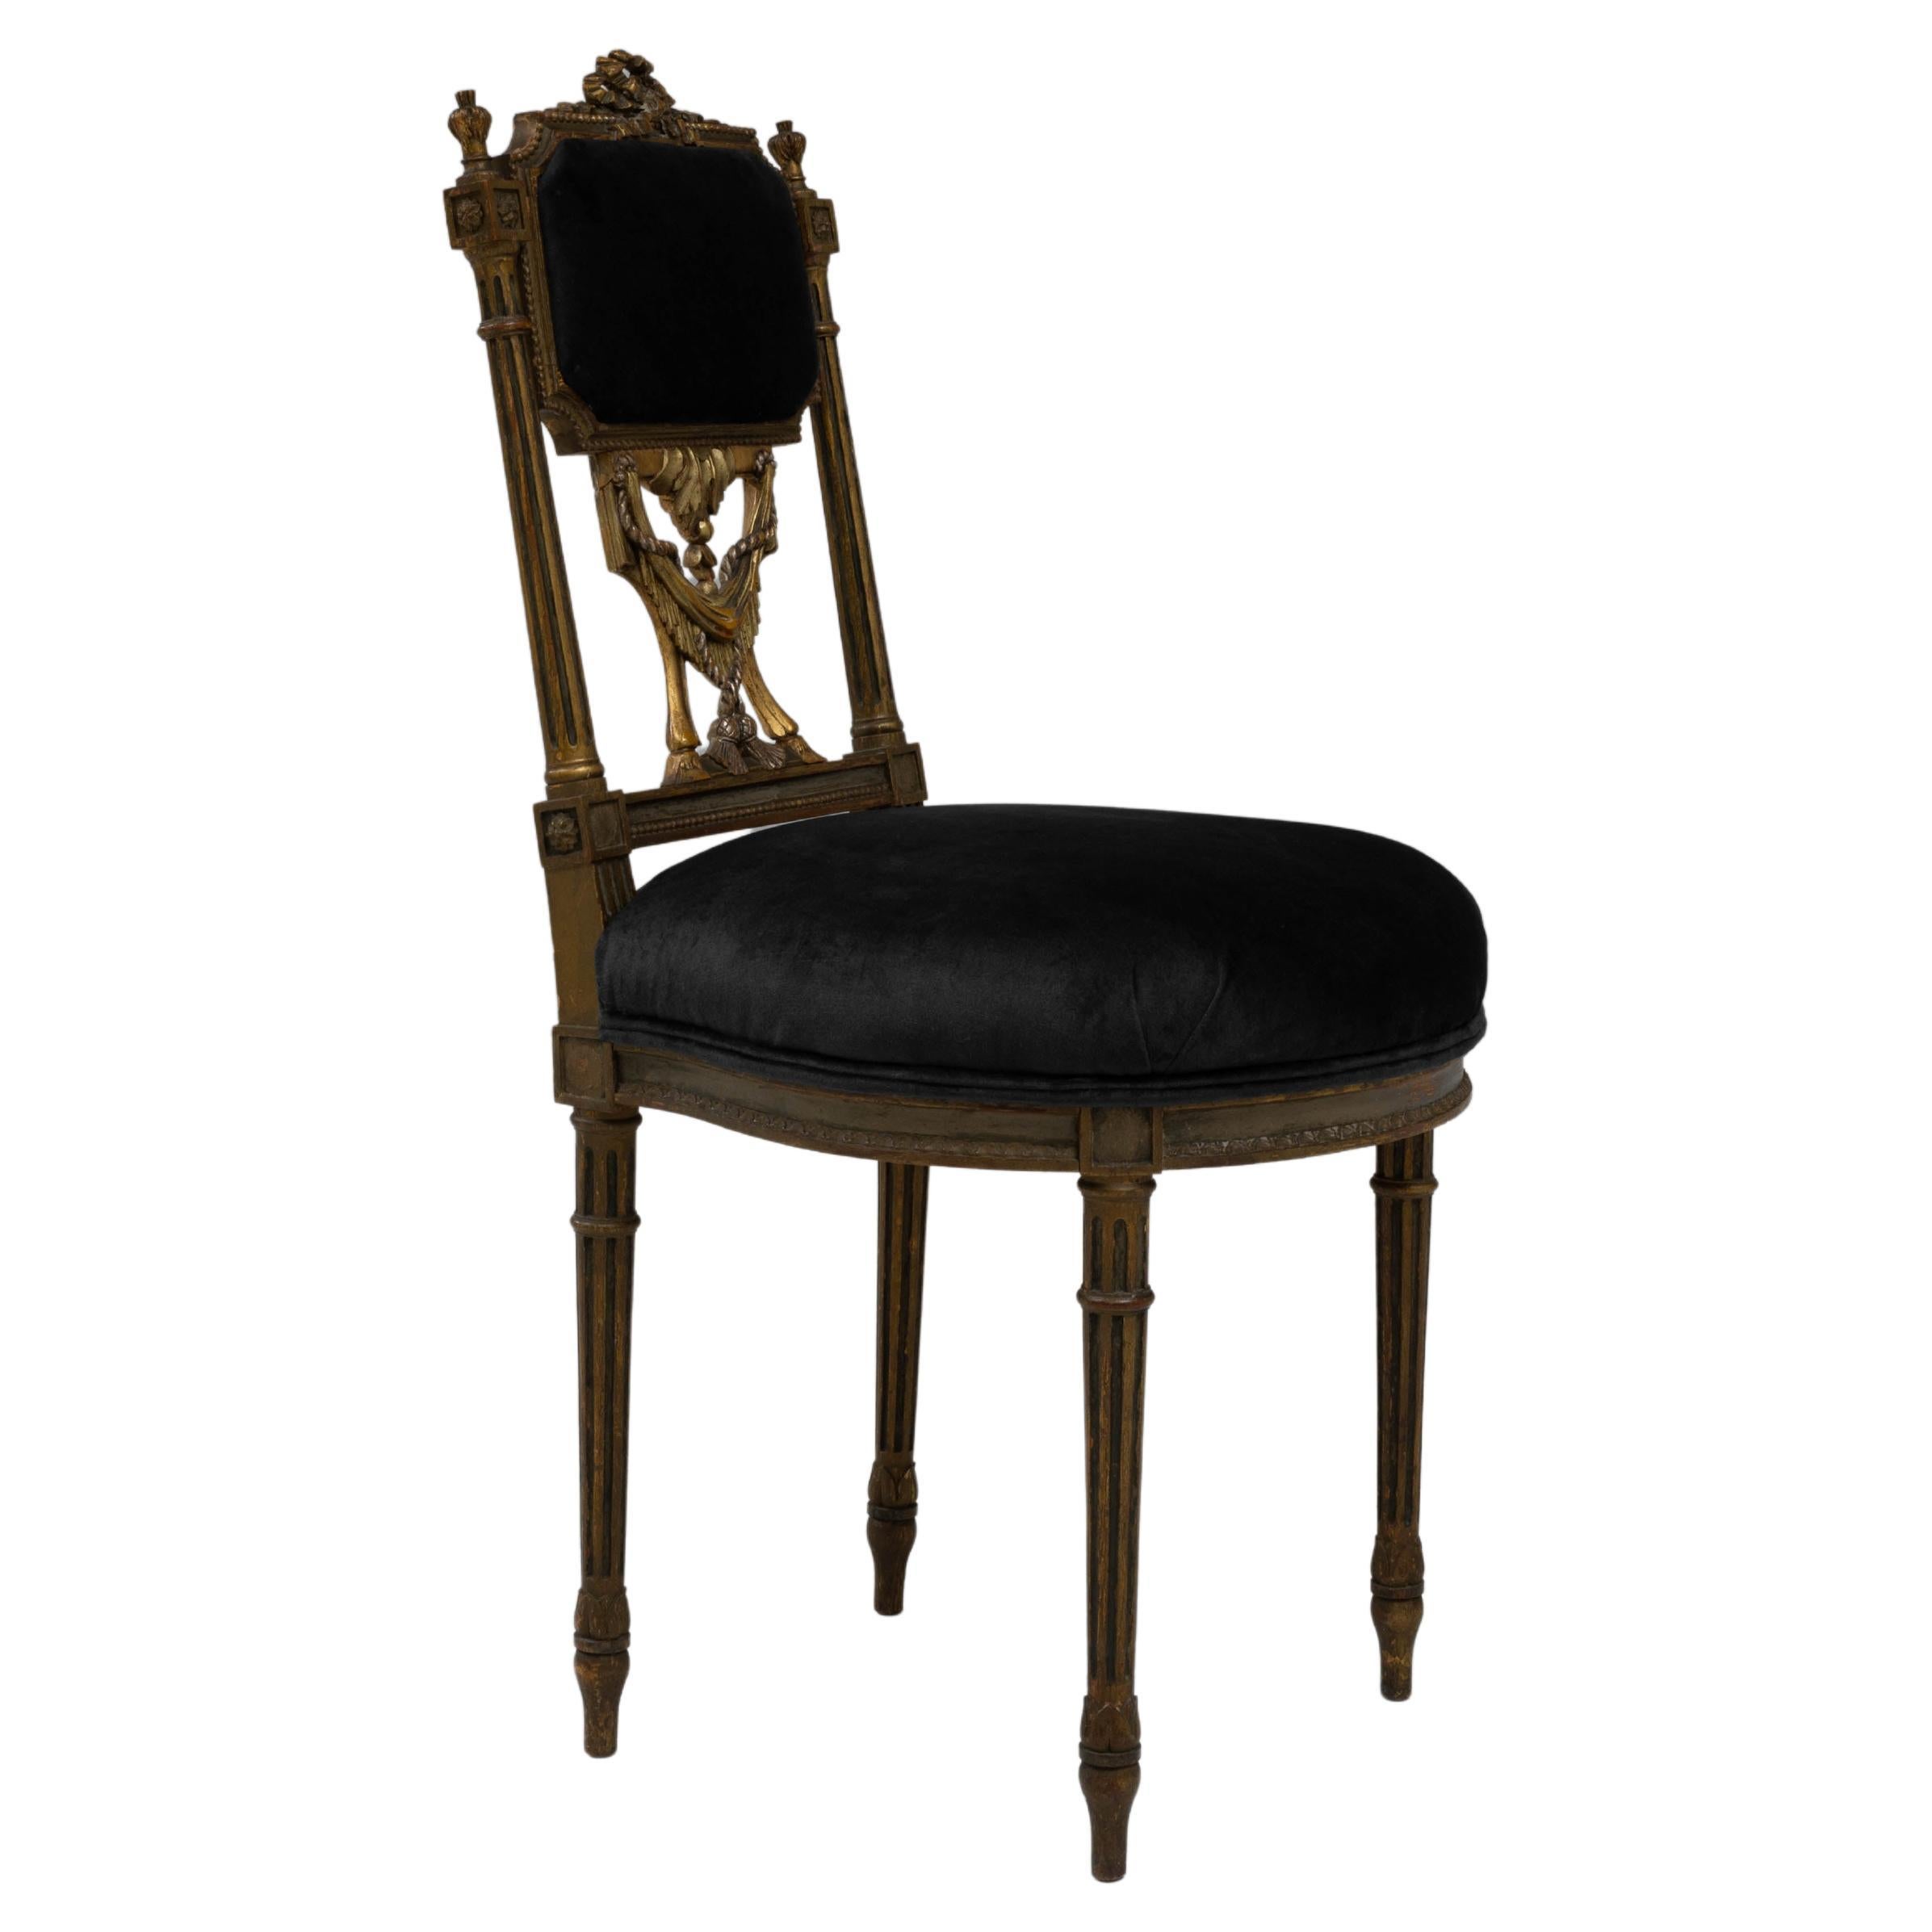 19th Century French Wooden Chair With Upholstered Seat For Sale